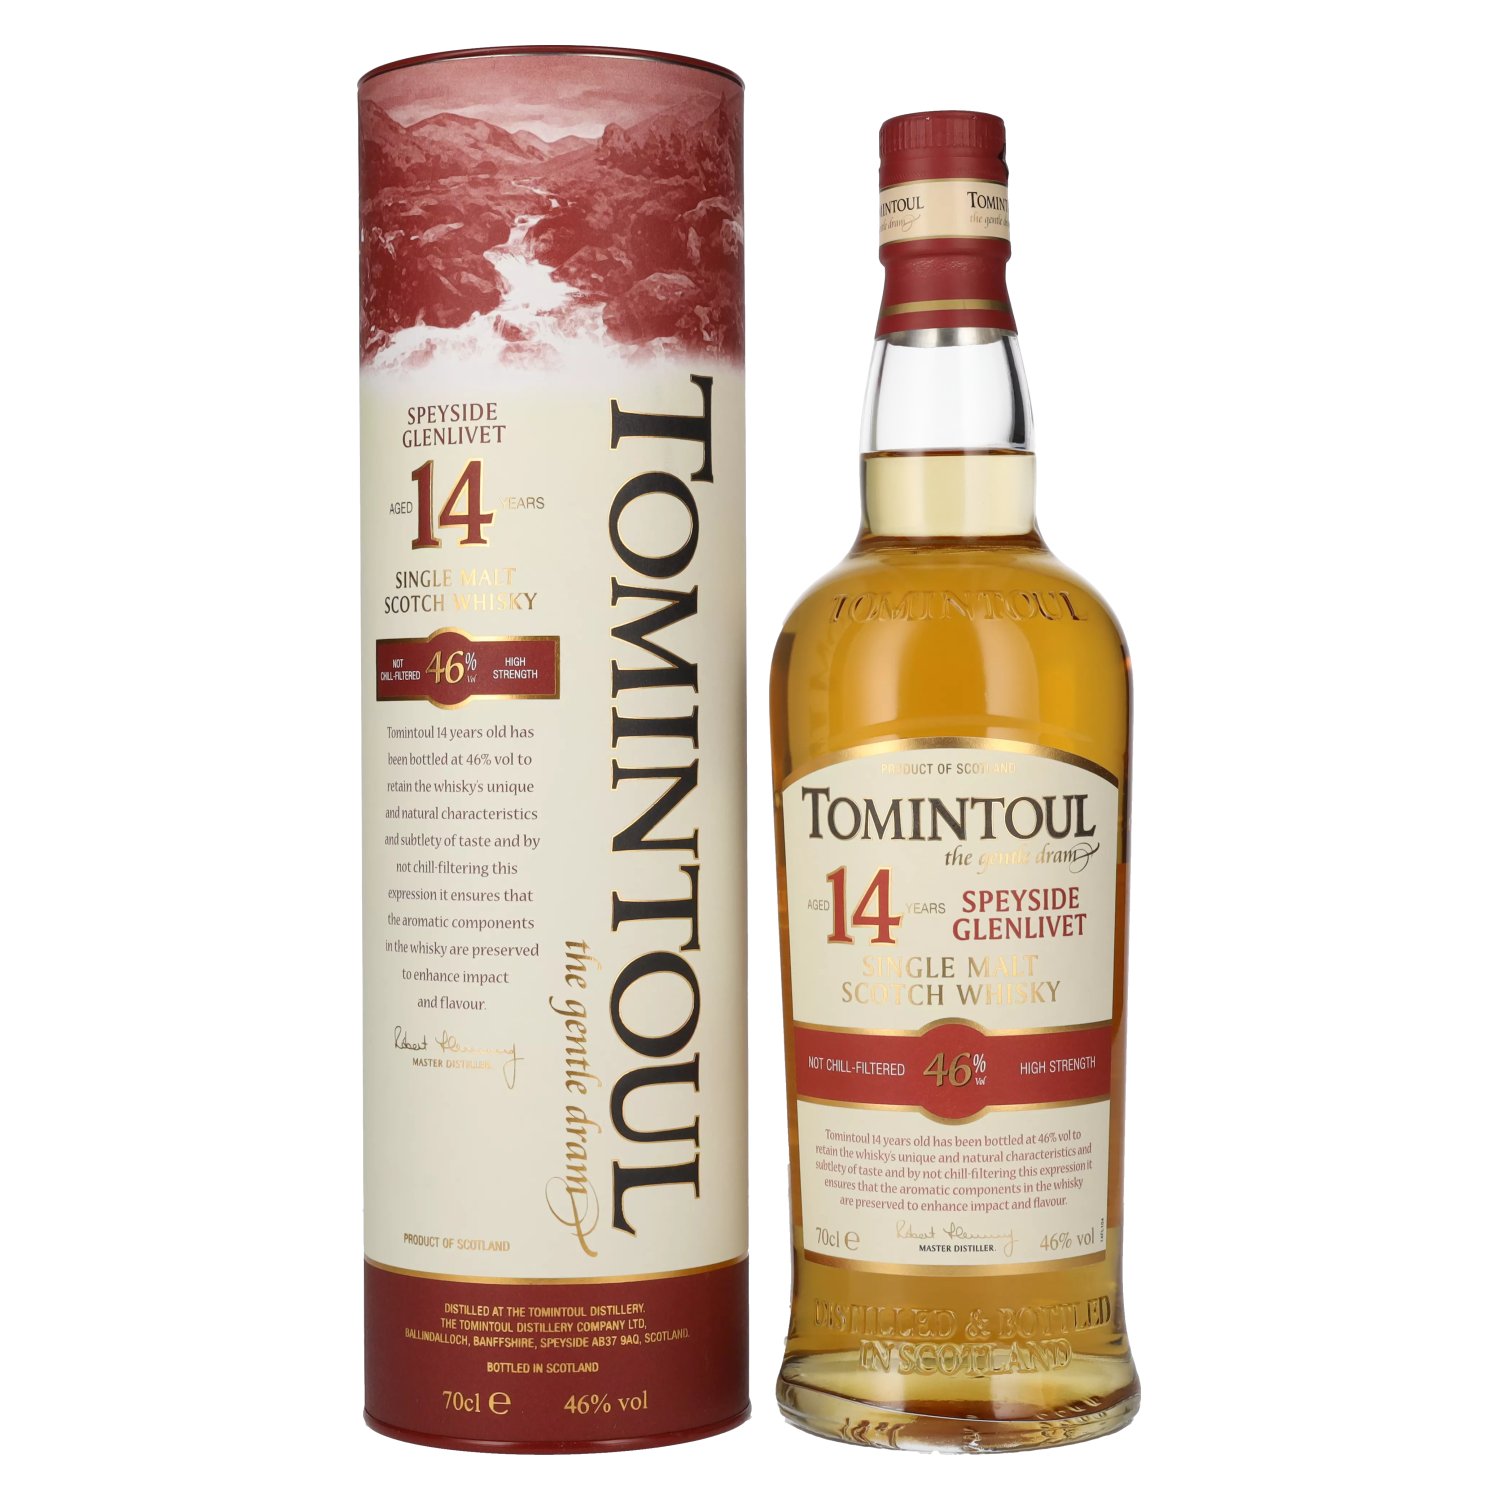 Tomintoul 14 Years Old Single Malt Scotch Whisky 46% Vol. 0,7l in  Geschenkbox | Whisky